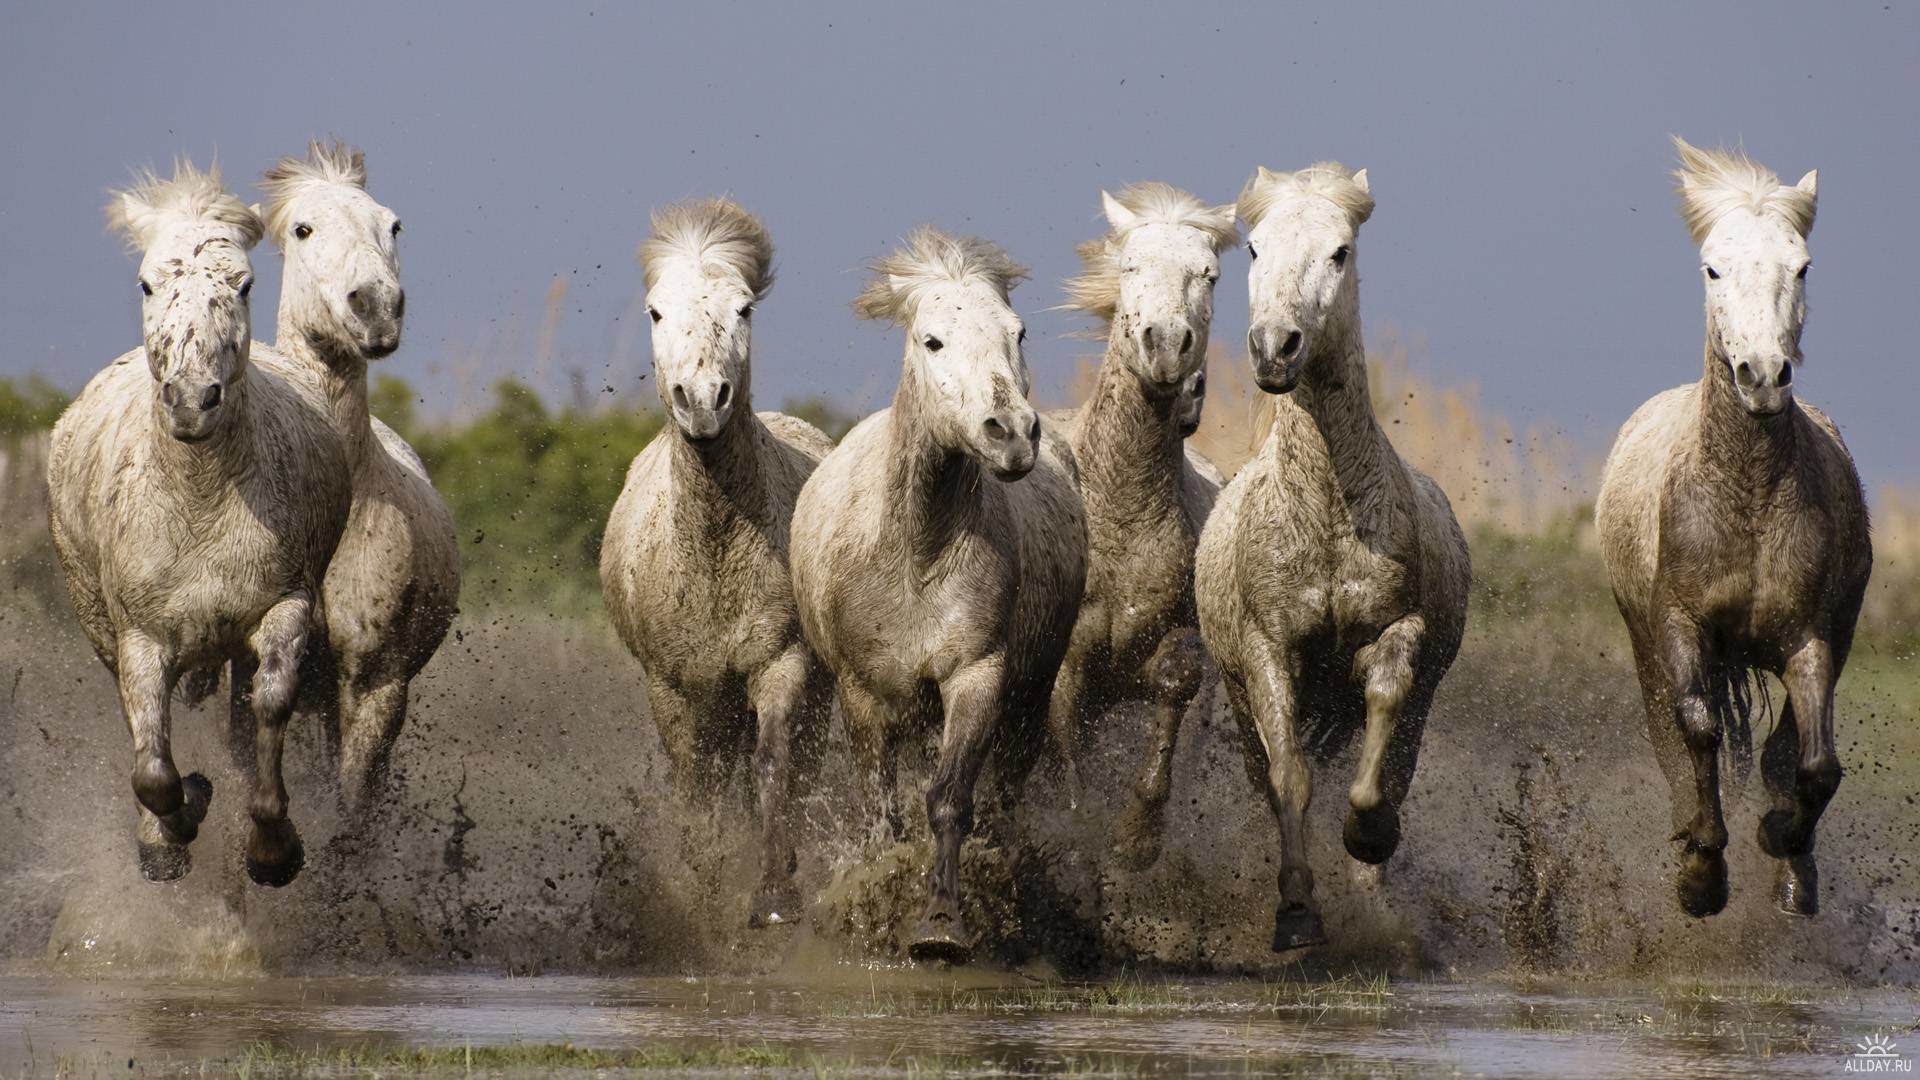 1920x1080 running horses images | Running Horse Wallpapers Unique Nature Hd Wallpapers  Design  .